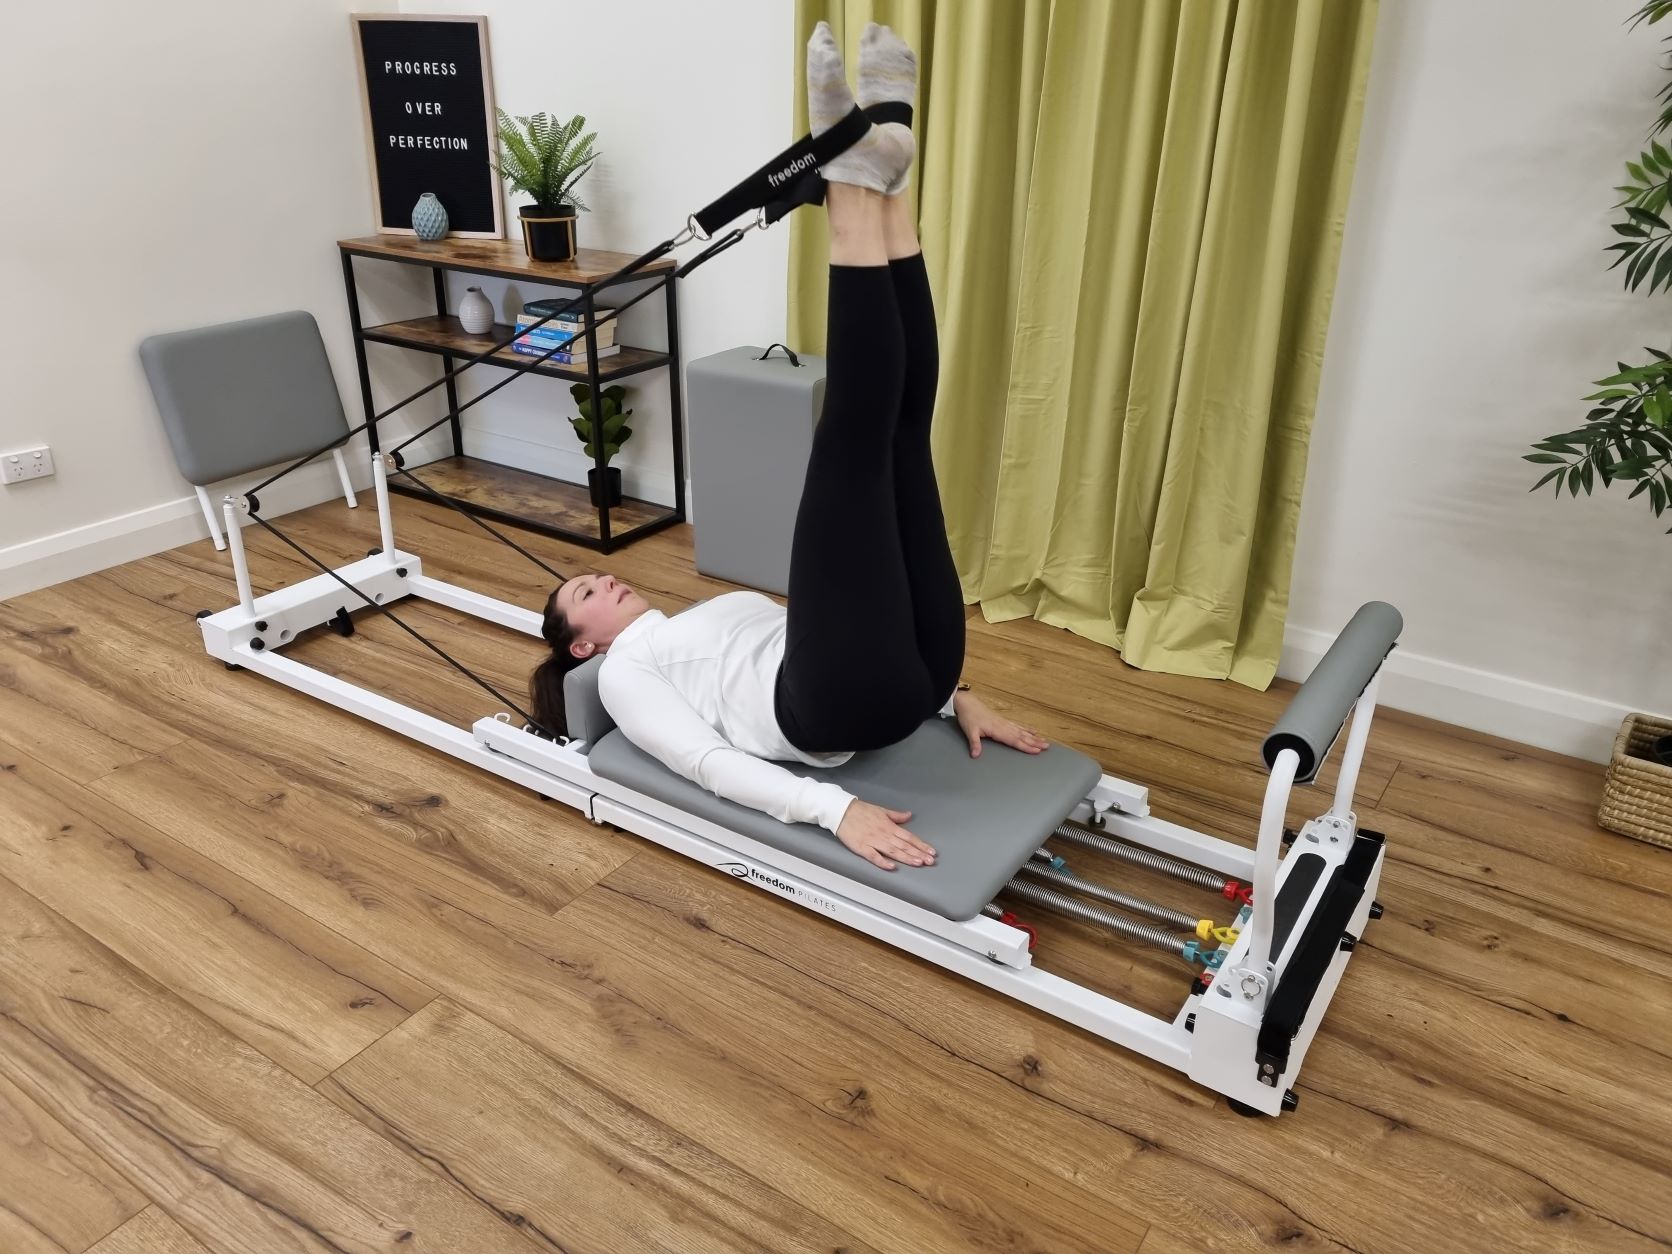 https://freedompilates.co.nz/wp-content/uploads/2021/07/HP-low-res2.jpg